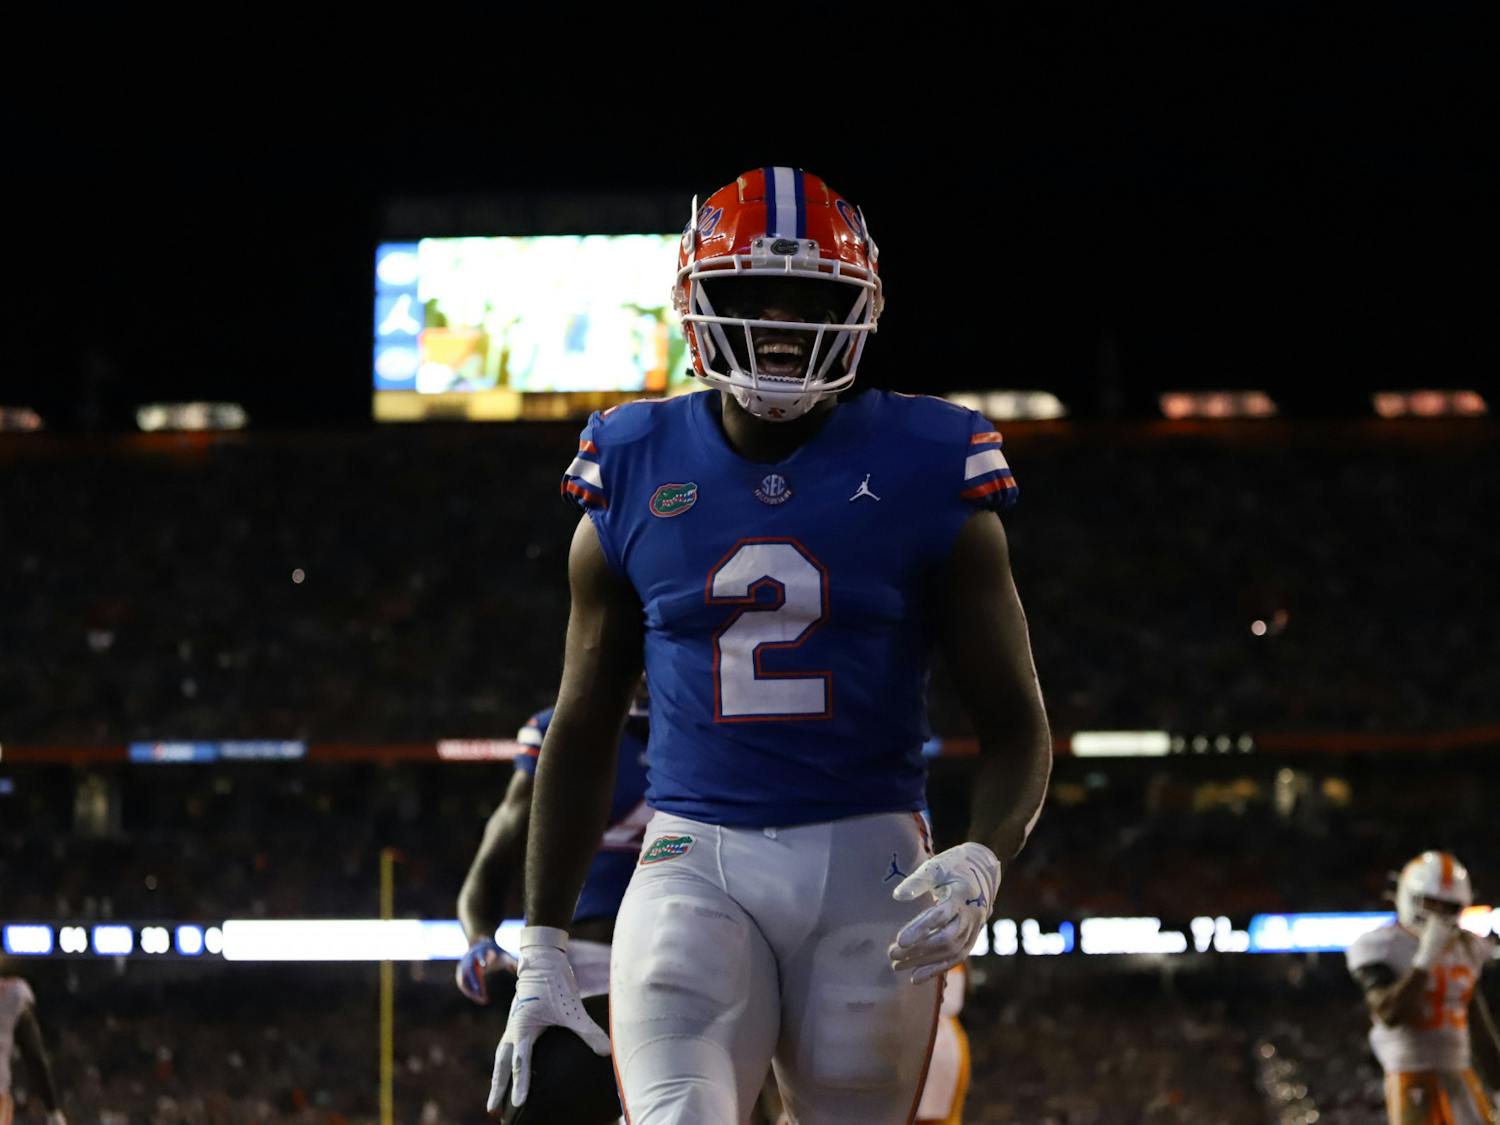 Florida tight end Kemore Gamble lets out a yell after scoring a touchdown on a trick play in the Gators' game against Tennessee on Sept. 25, 2021.